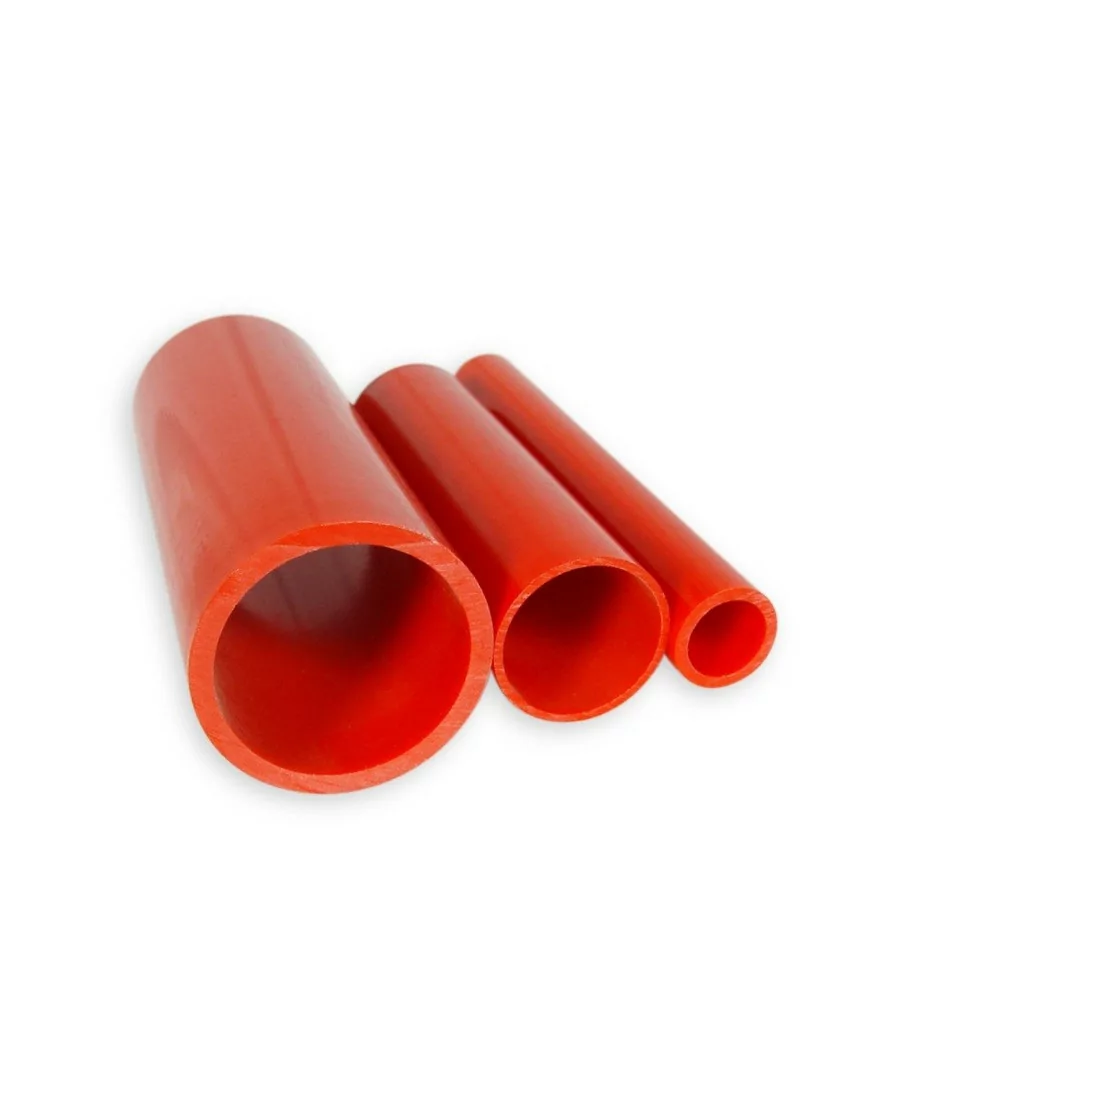 PVC pipe red 16mm